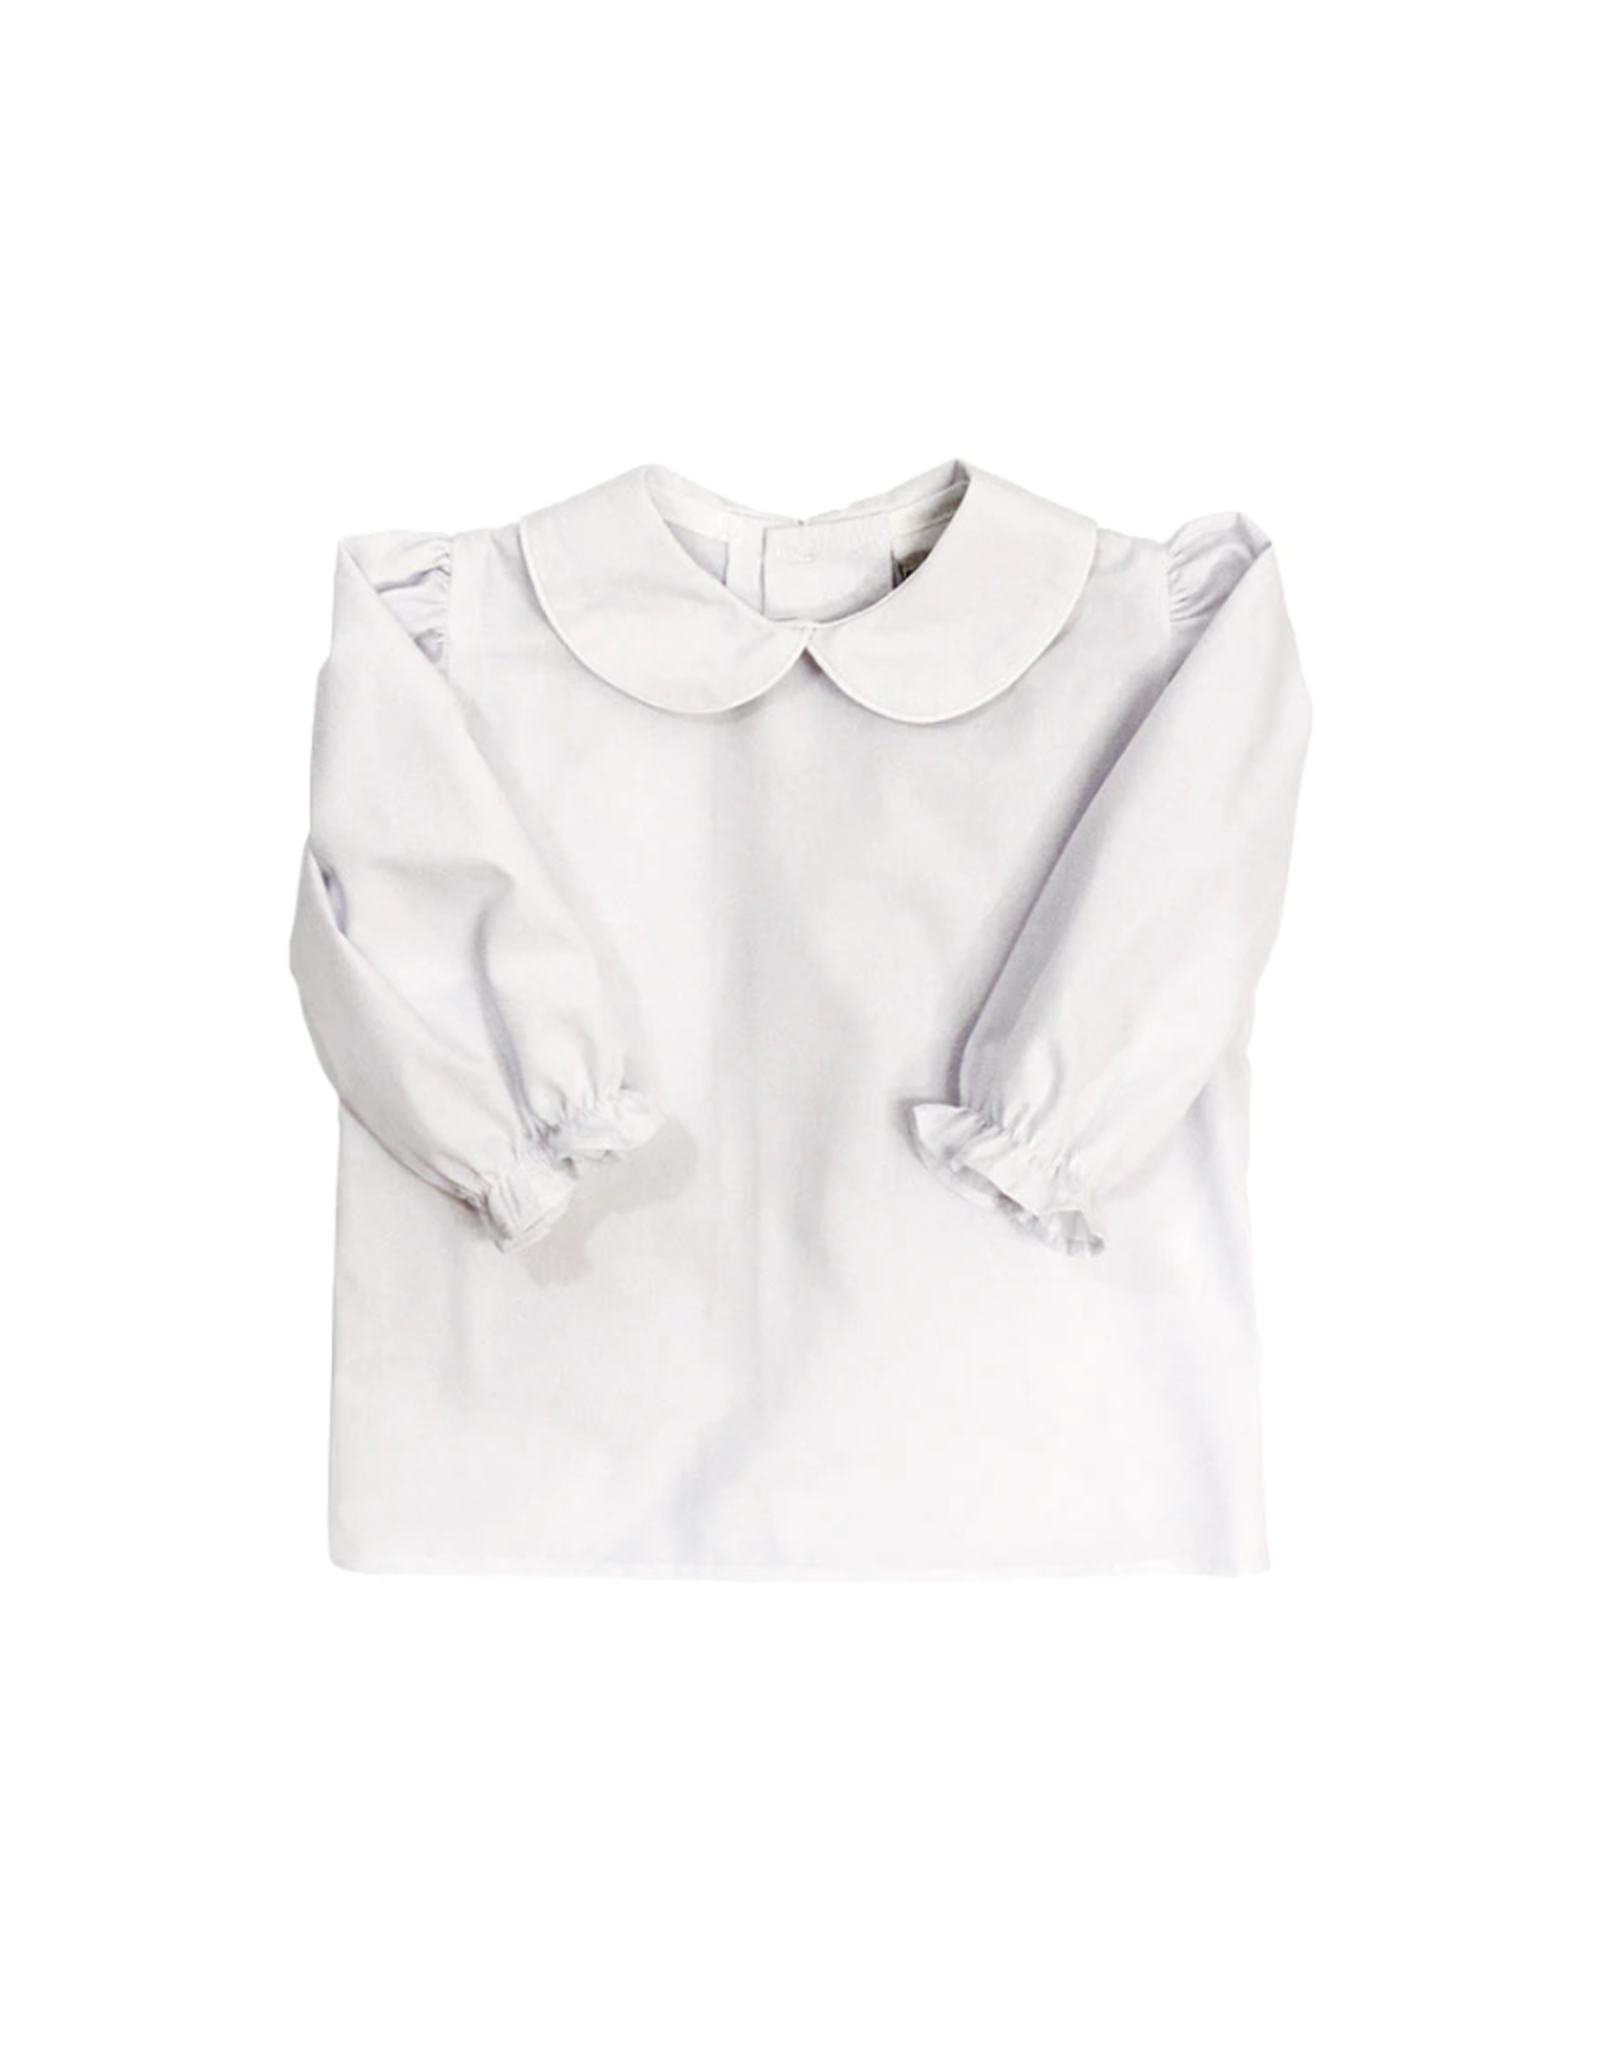 The Bailey Boys White Girls Long Sleeve Blouse w/ Button Back